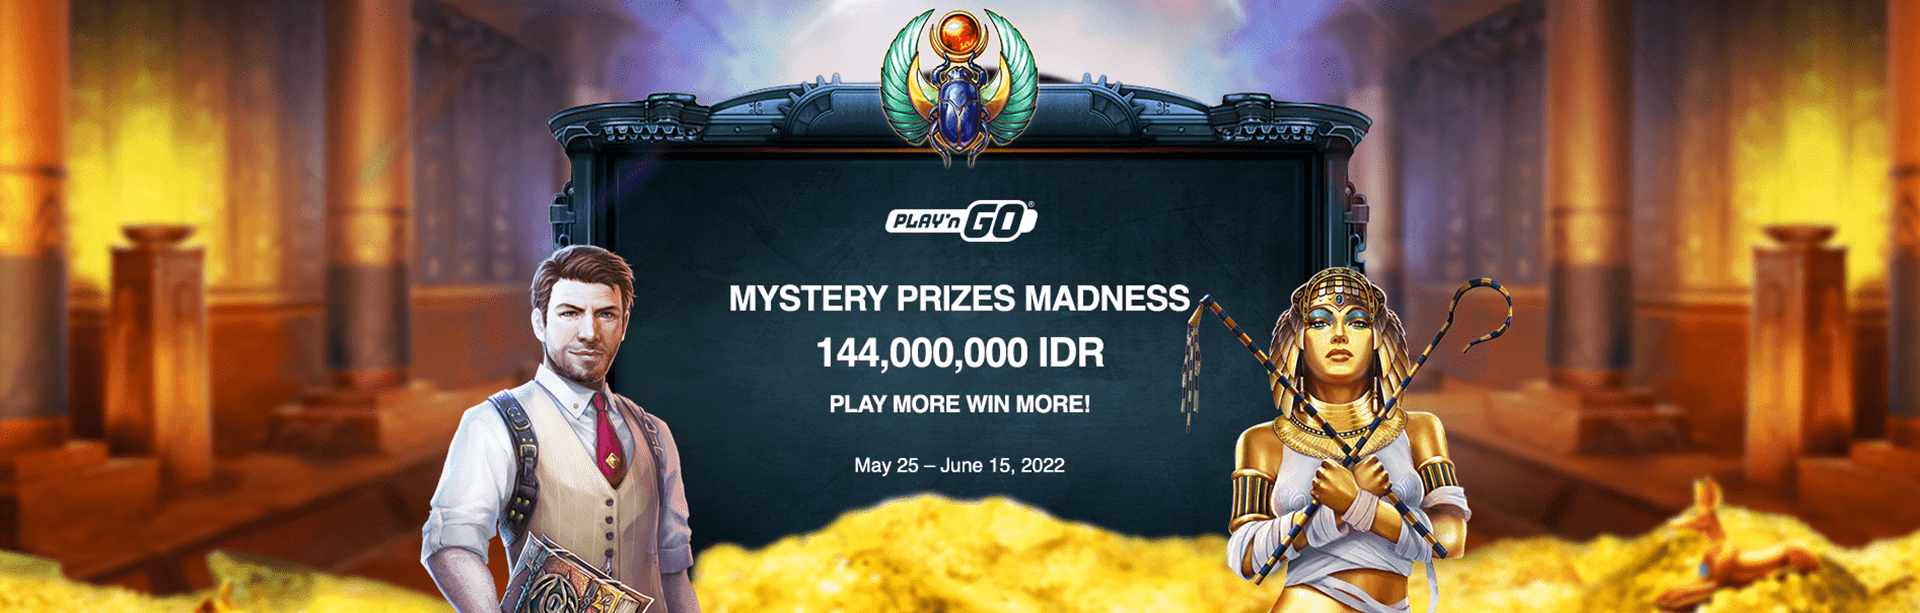 Play'n Go Mystery Prizes Madness